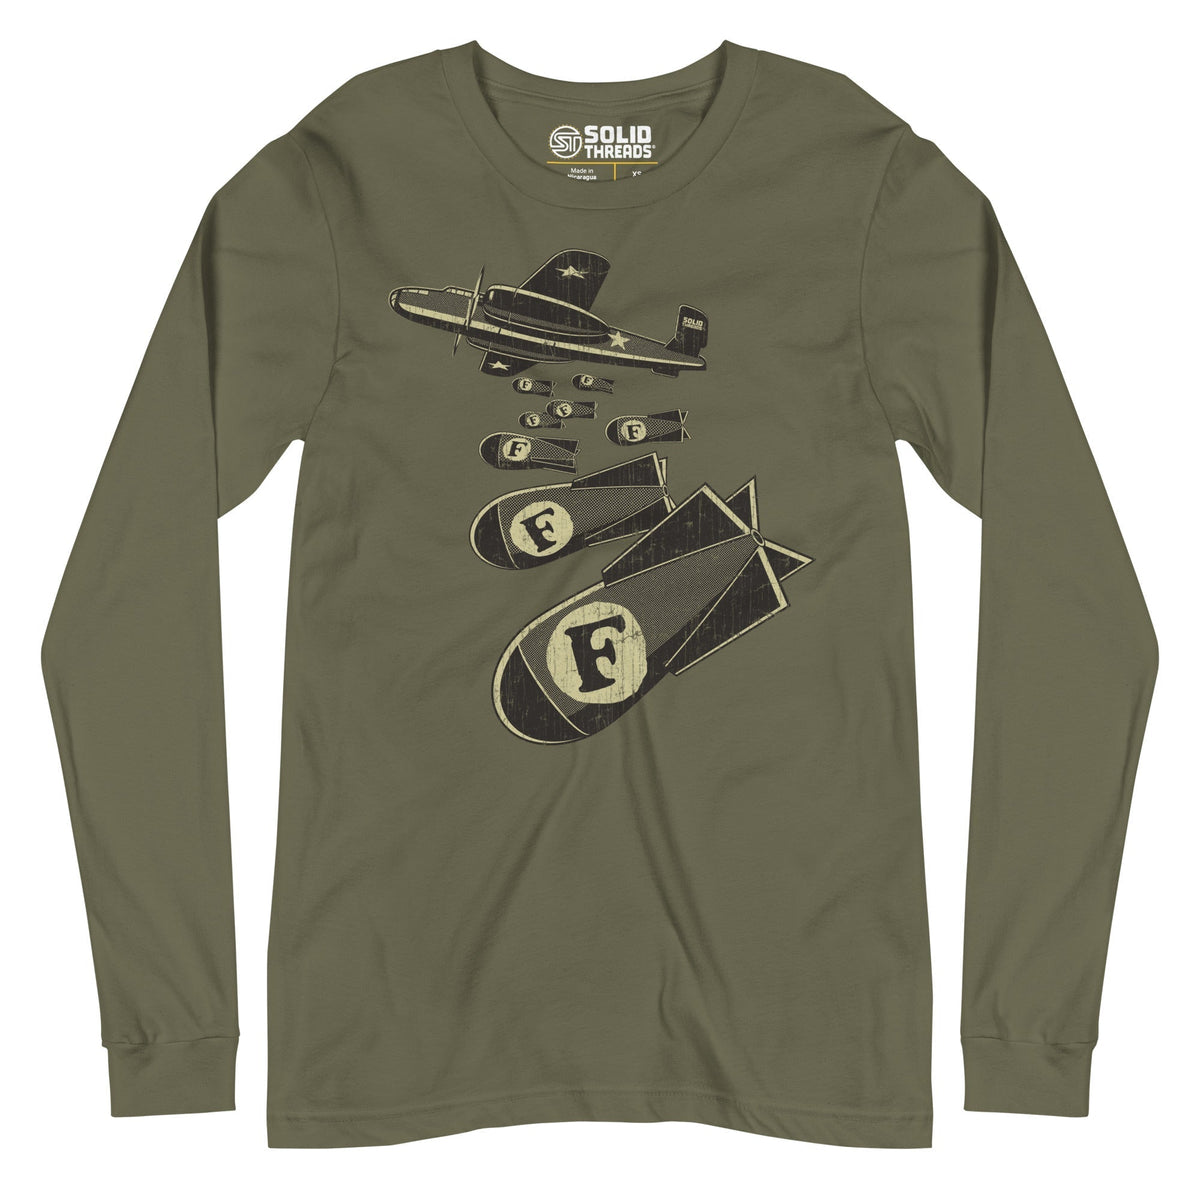 Unisex F Bombs Funny Double Entendre Long Sleeve Tee | Vintage Swearing Pun Soft T-Shirt | SOLID THREADS